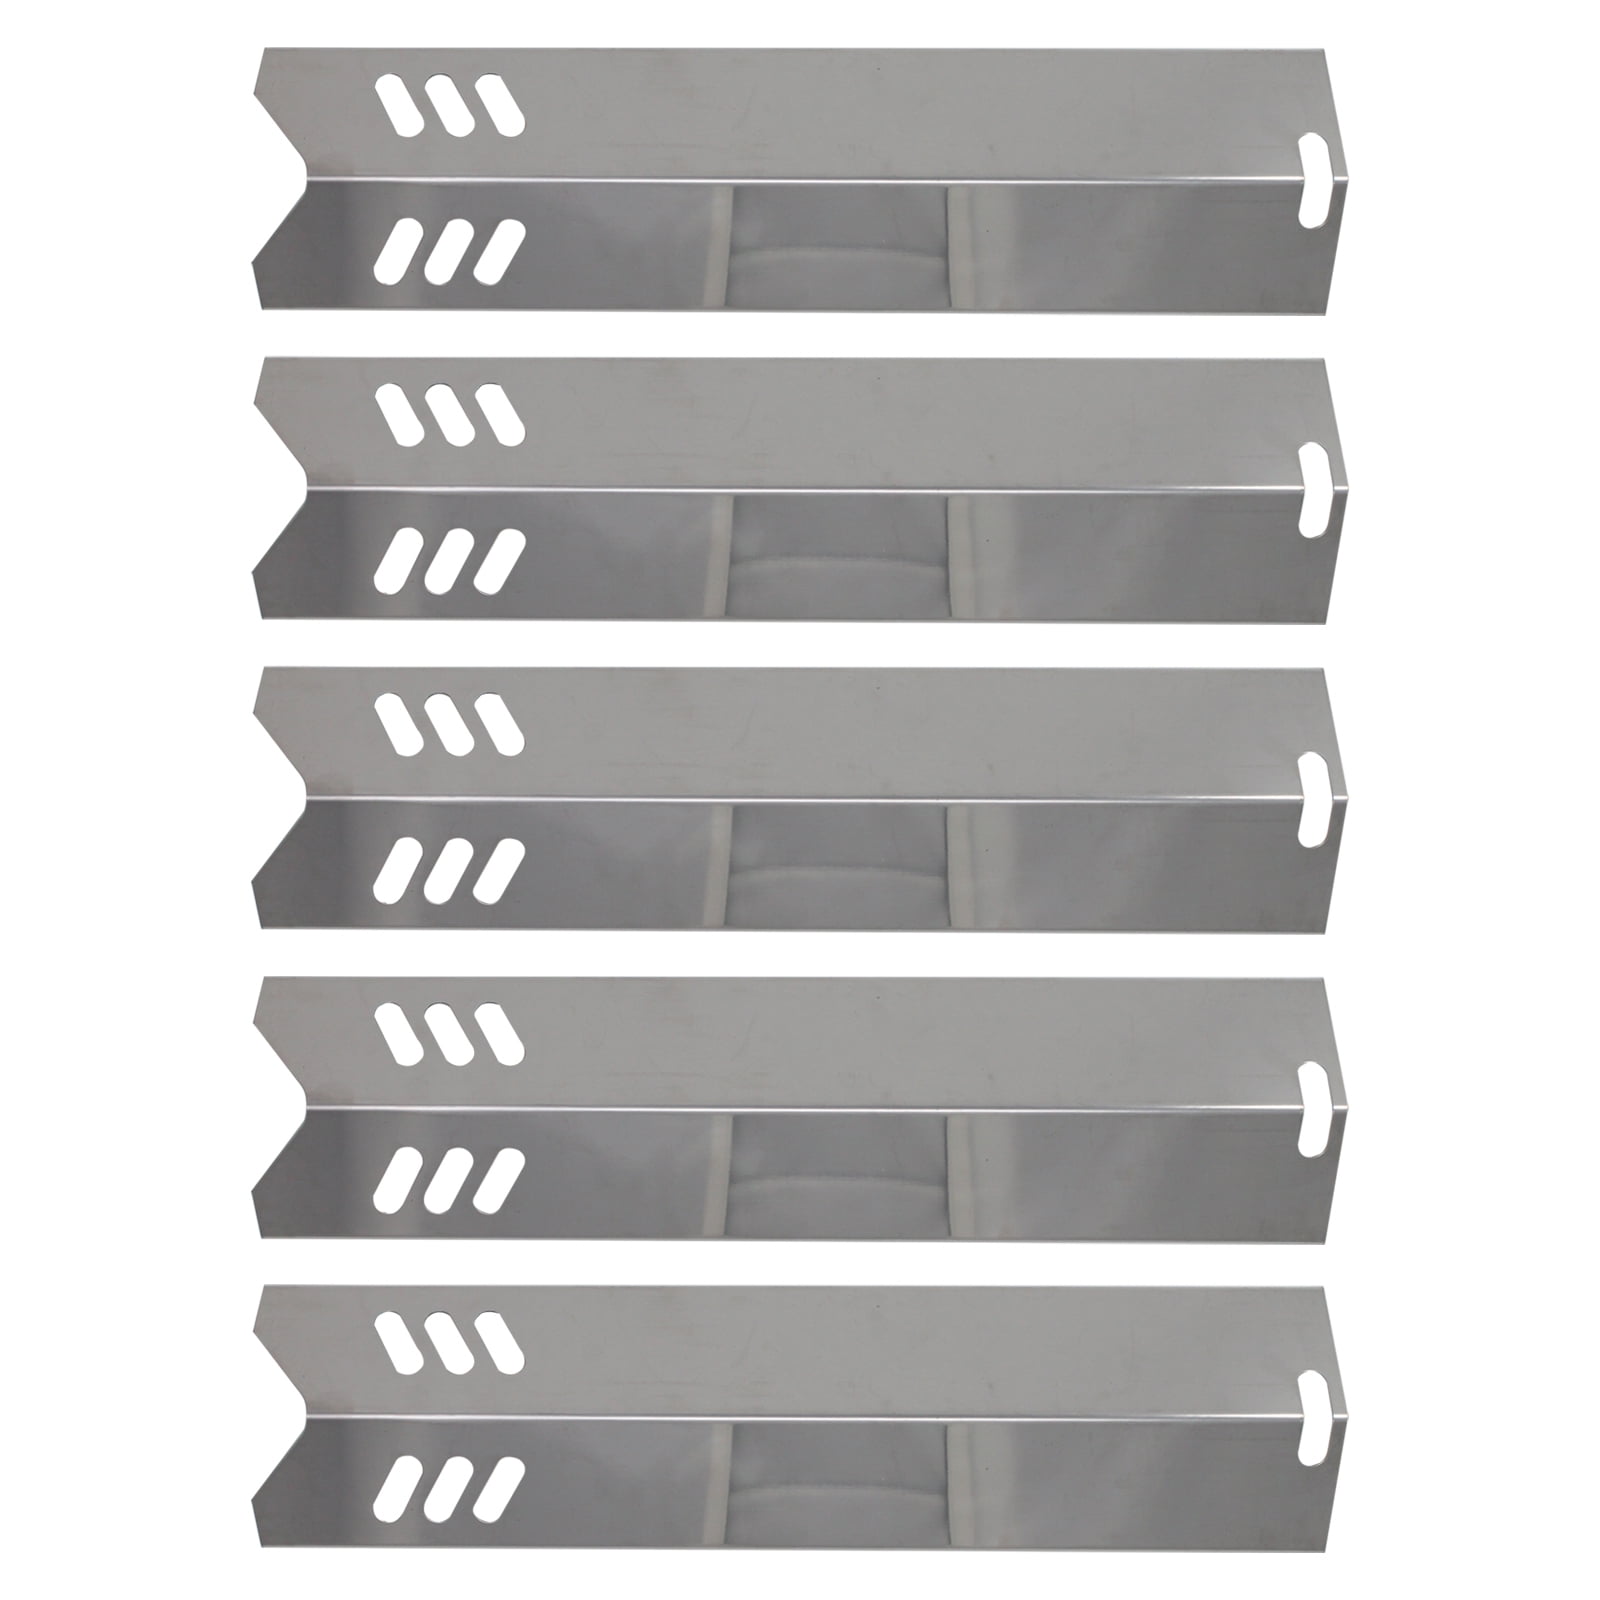 Uniflame GBC1059WB 5-Pack Kalomo Stainless Steel Gas Grill Heat Plates Shield Burner Covers Flame Tamer 15 BBQ Grill Replacement Parts Heavy Duty for Dyna-Glo DGF510SBP Backyard BY12-084-029-98 